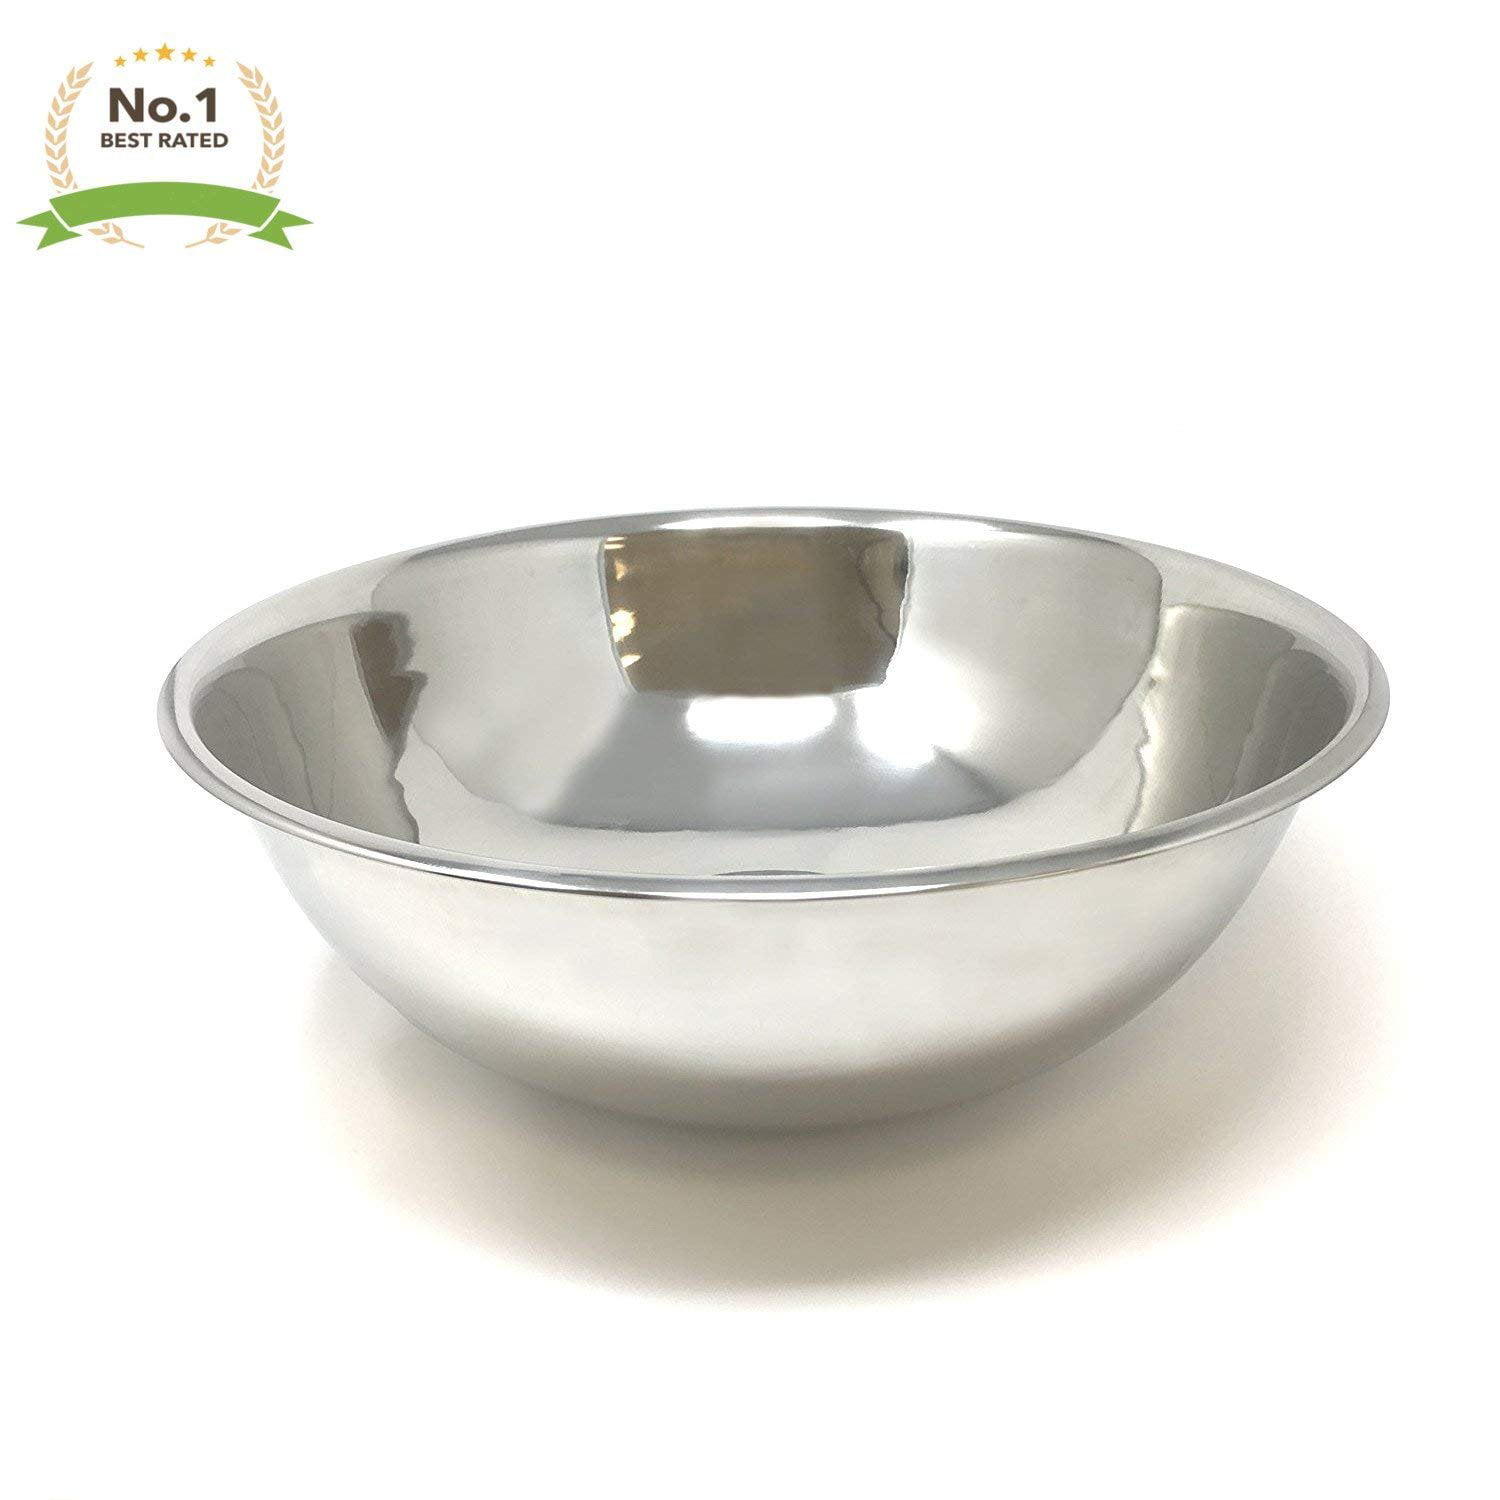  Gigicloud Stainless Steel Mixing Bowl, 304 Stainless Steel Deep  Bowl Deep Anti-flying Design Kitchen Metal Bowls for Cooking Baking Mixing  Marinating Cake Bread Salad: Home & Kitchen